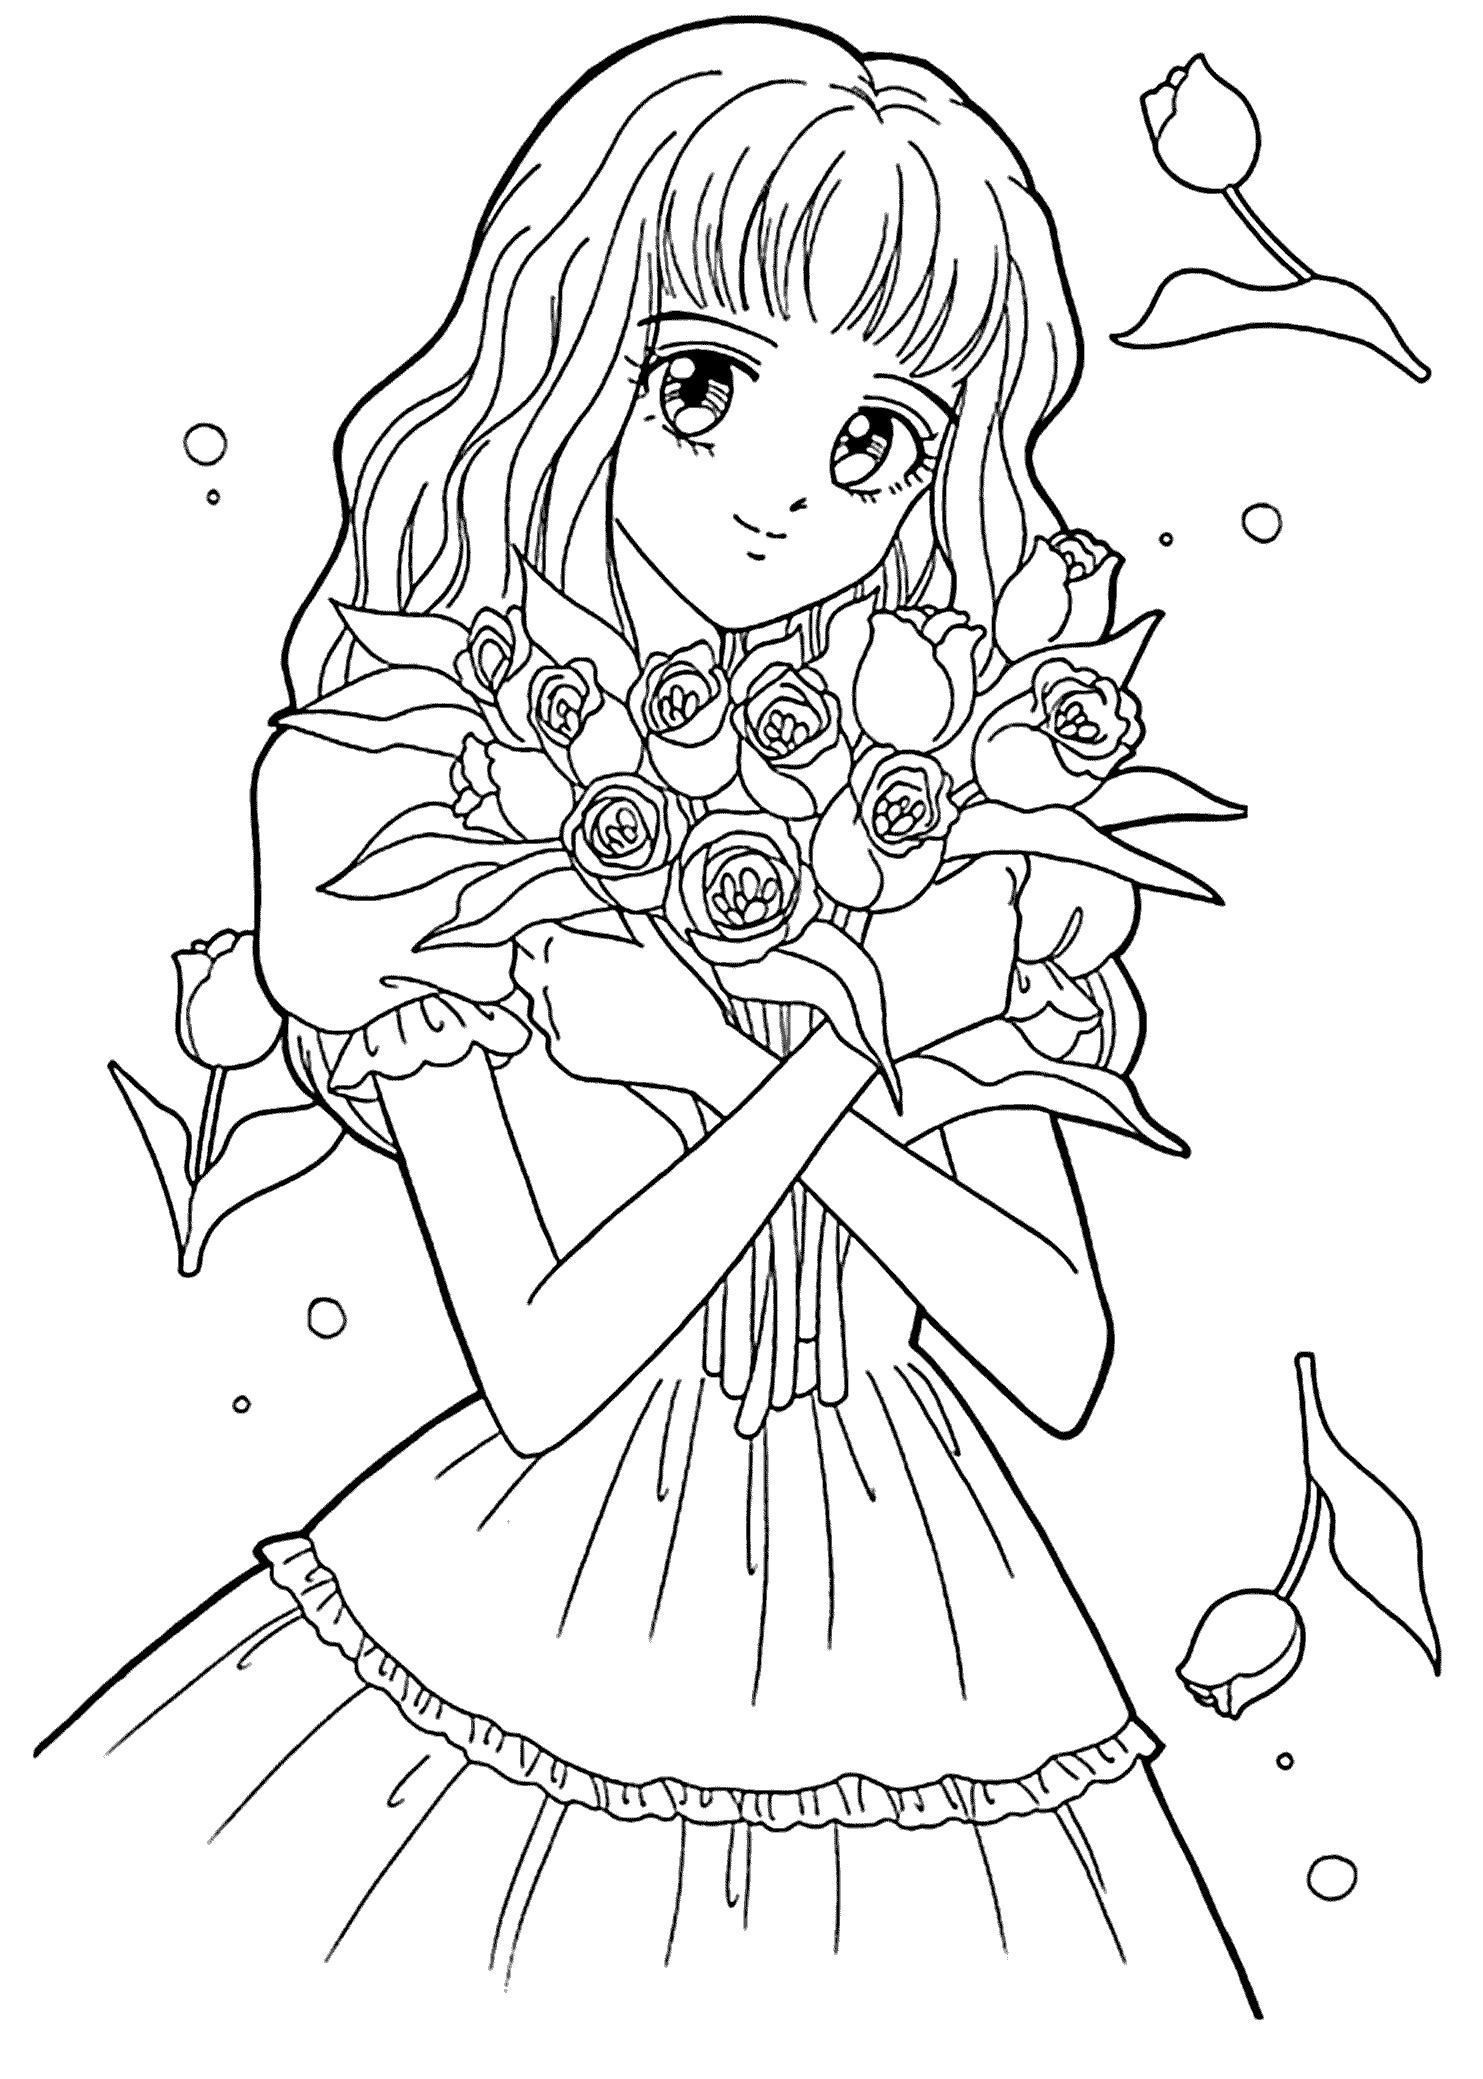 Printable Coloring Pages For Girls
 Best Free Printable Coloring Pages for Kids and Teens